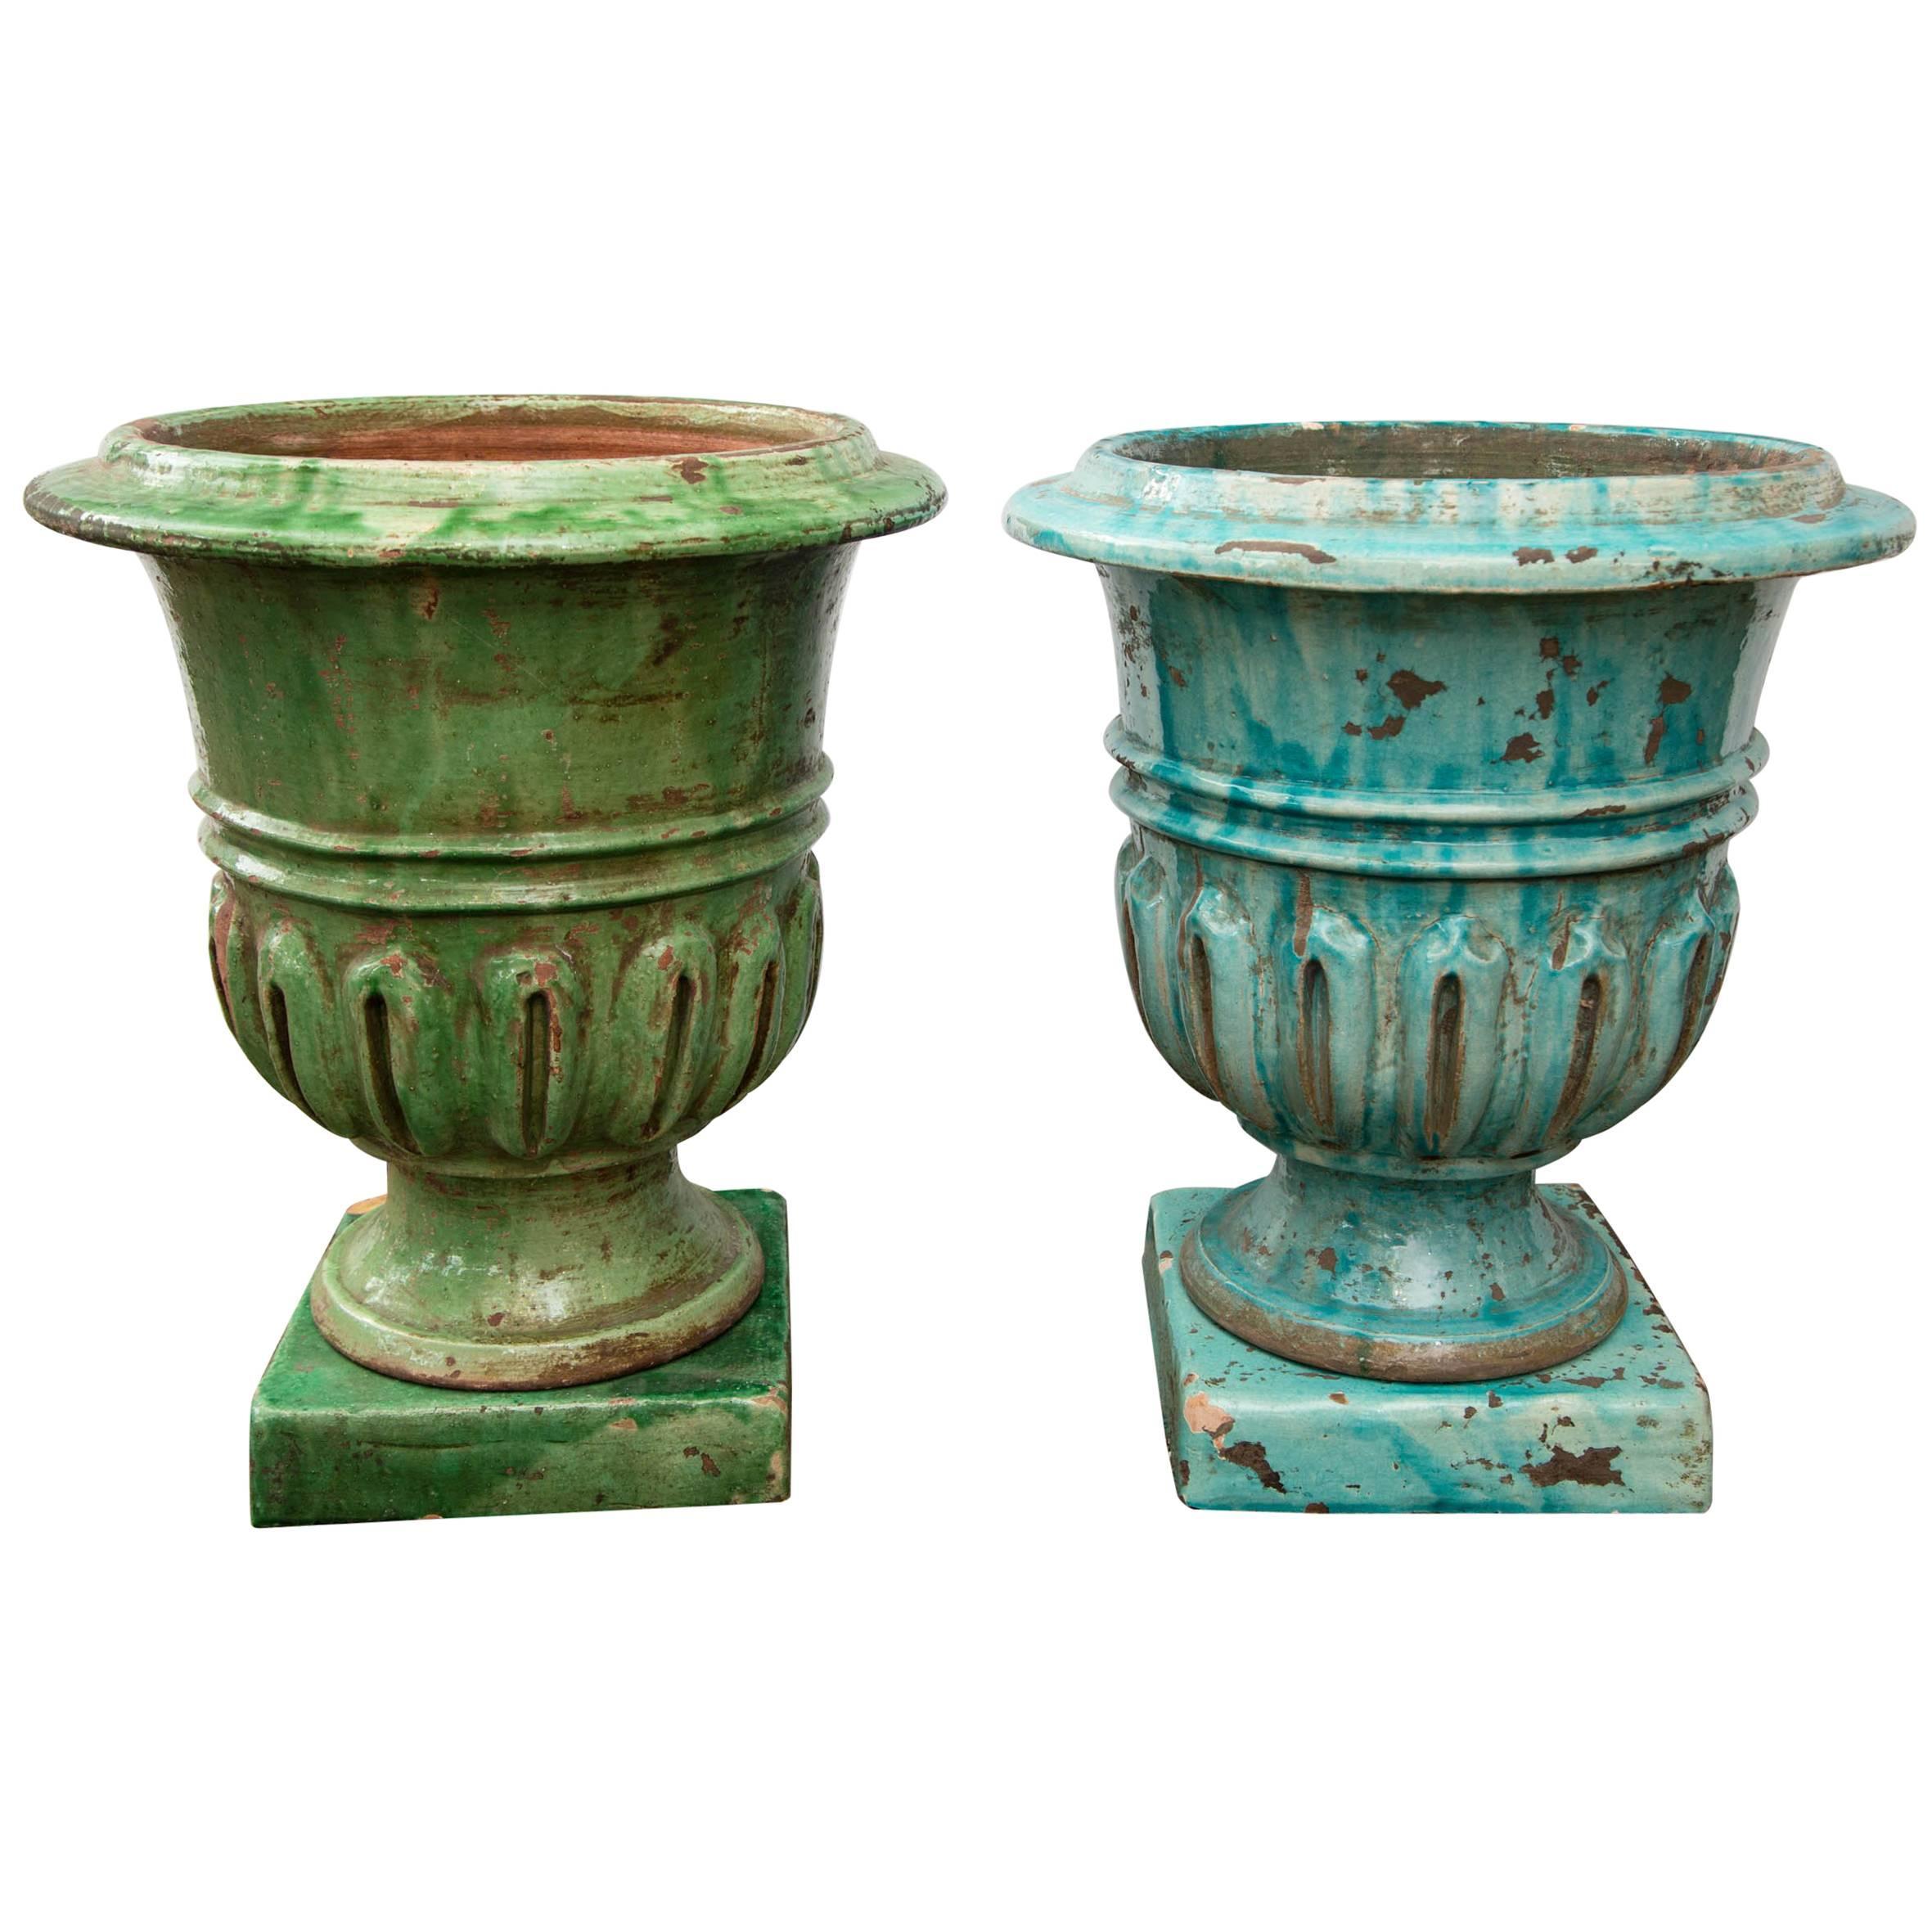 Pair of Hand-Painted Blue and Green Terracotta Planters